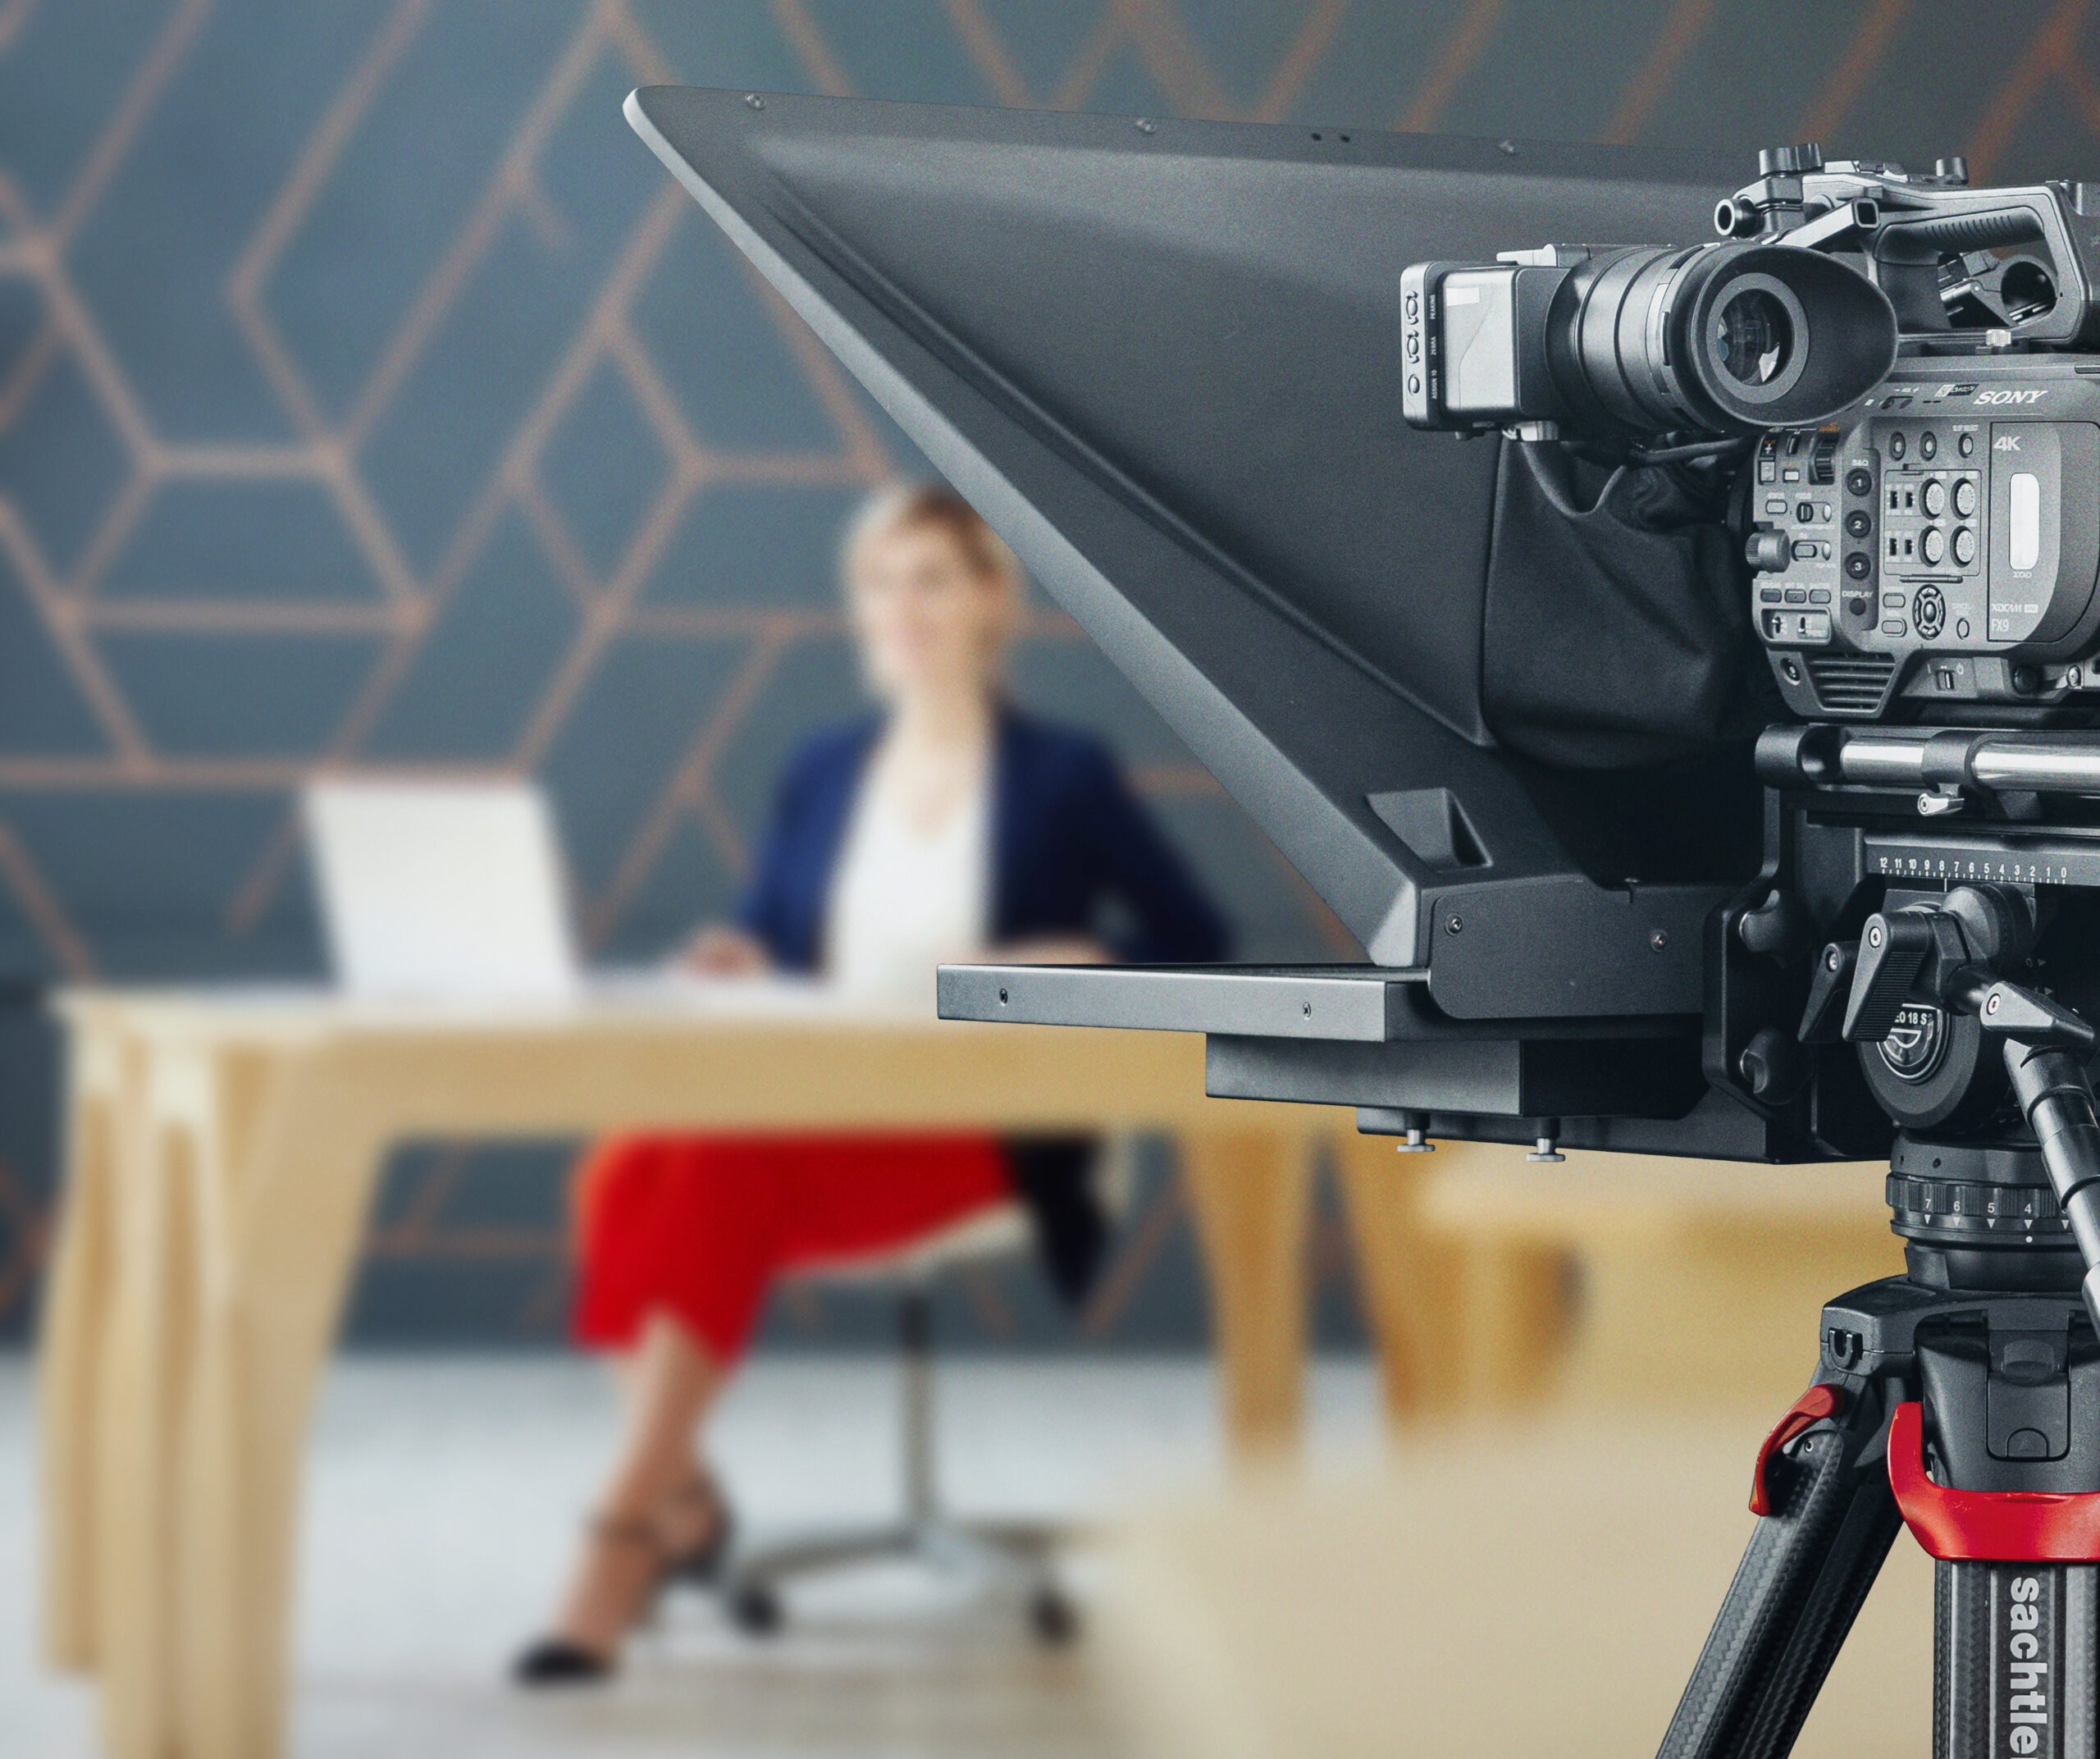 Autocue Introduce 'Presenting Simplicity' With New Teleprompter Range Designed for Modern Content Creators and Broadcasters.